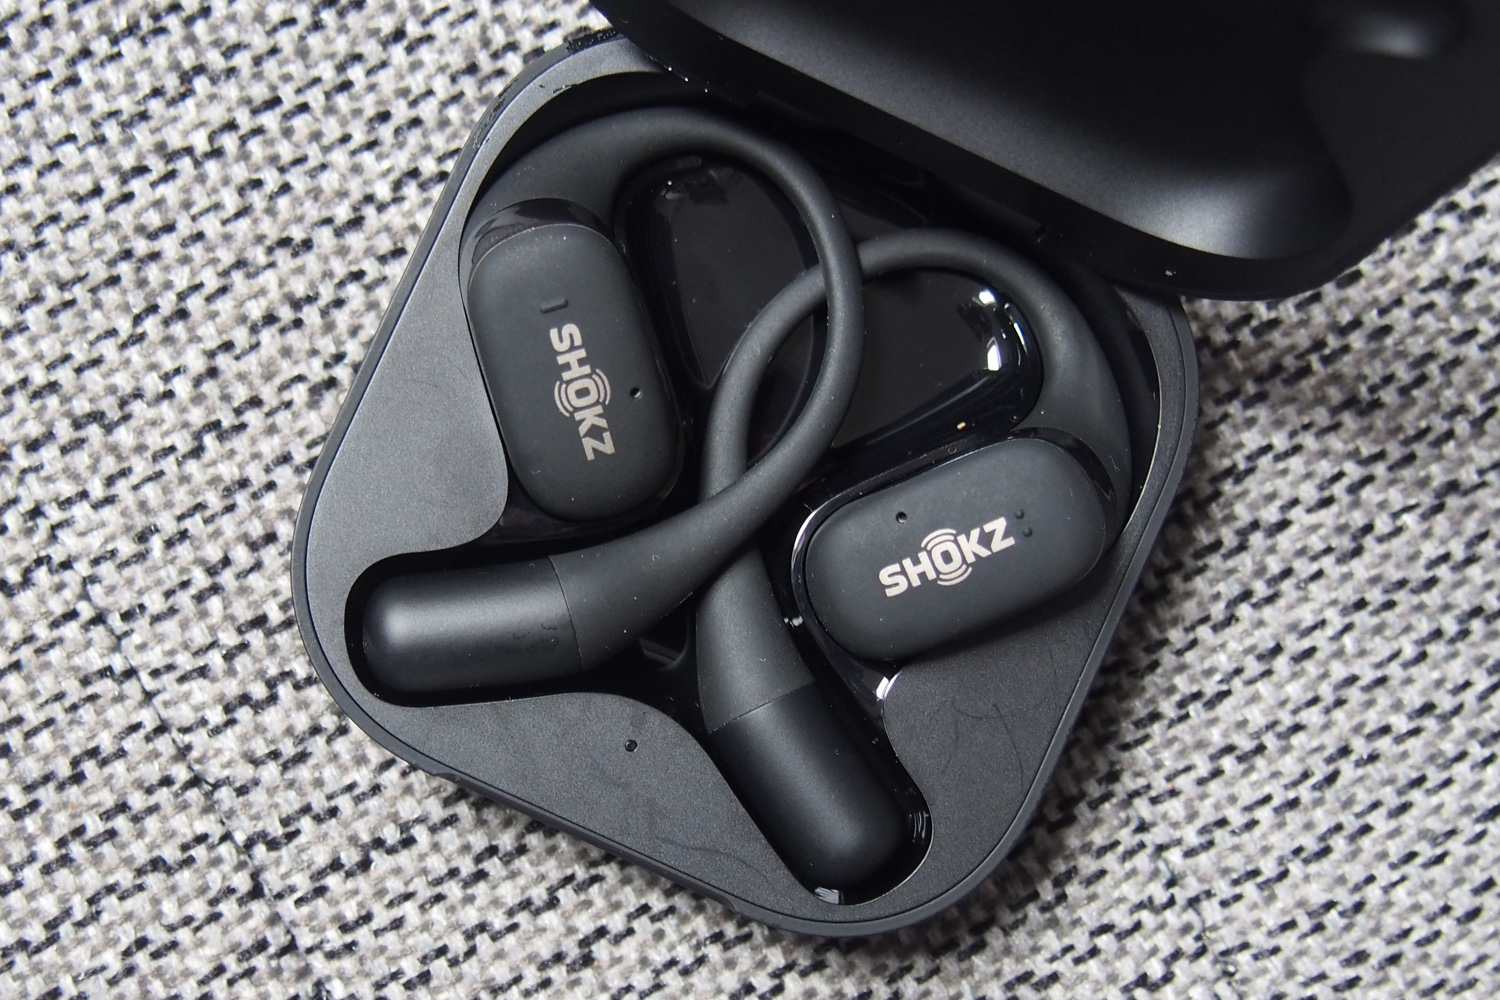 Shokz OpenFit buds in case